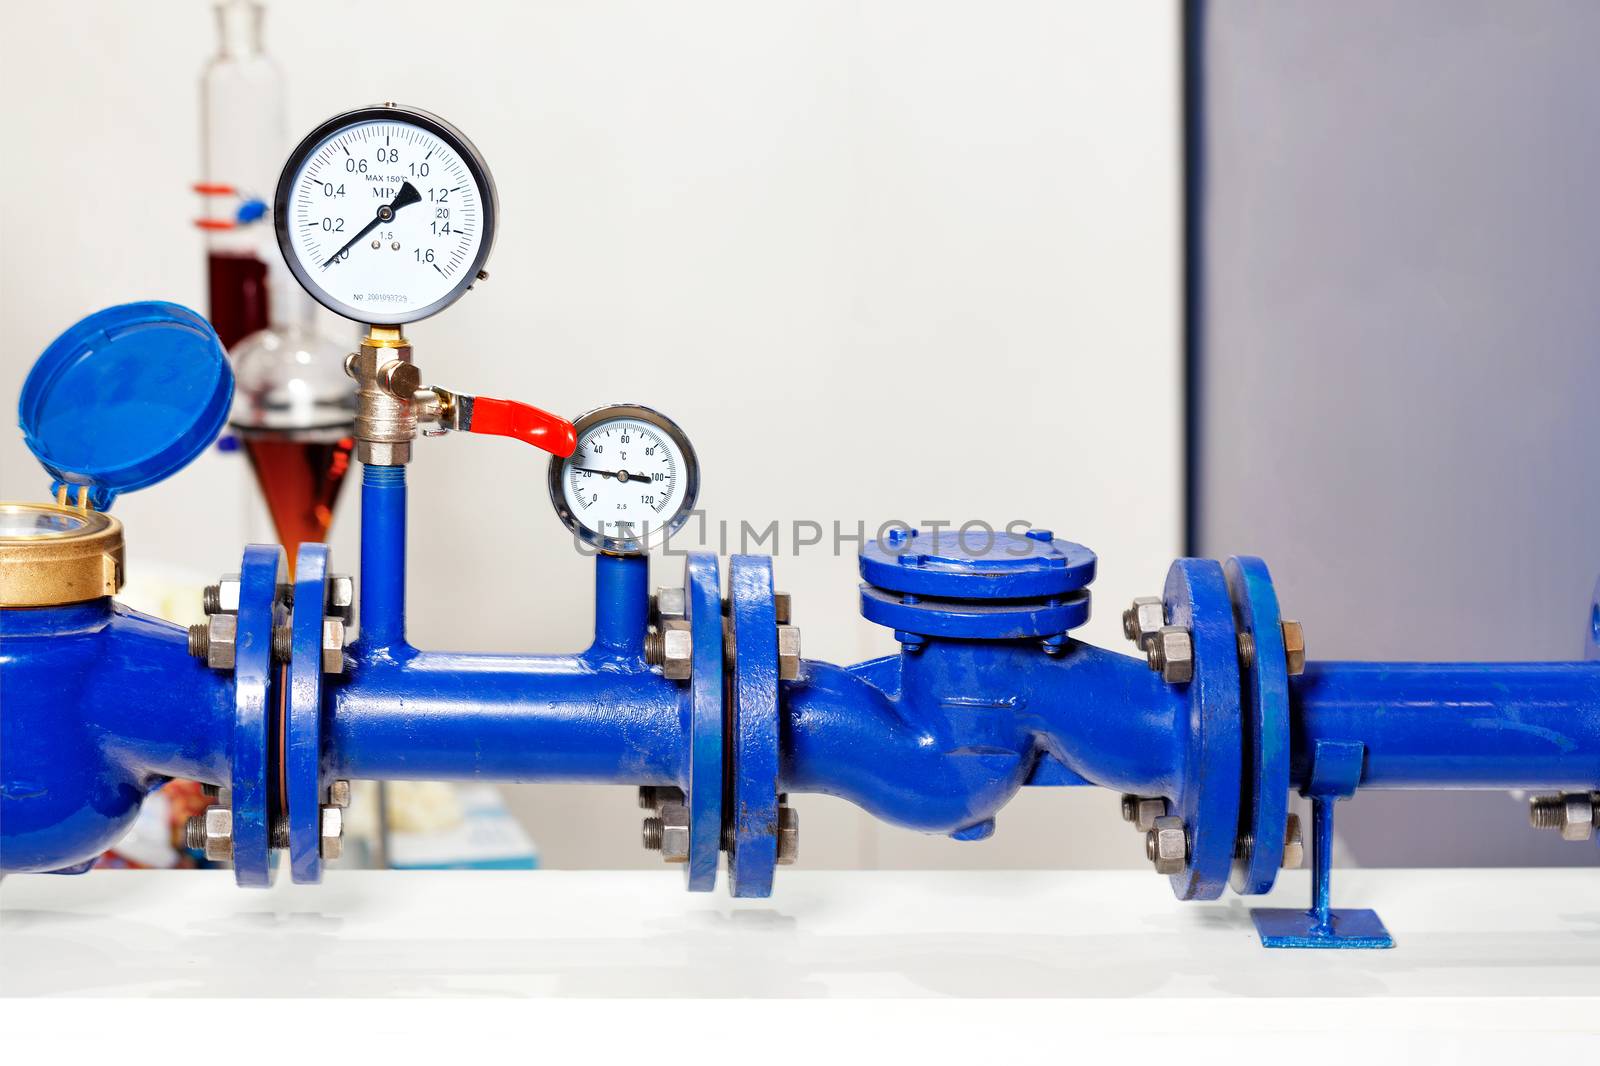 An example of the installation of a metering system and water pressure, close-up of pressure gauges, pipes and taps, copy space.